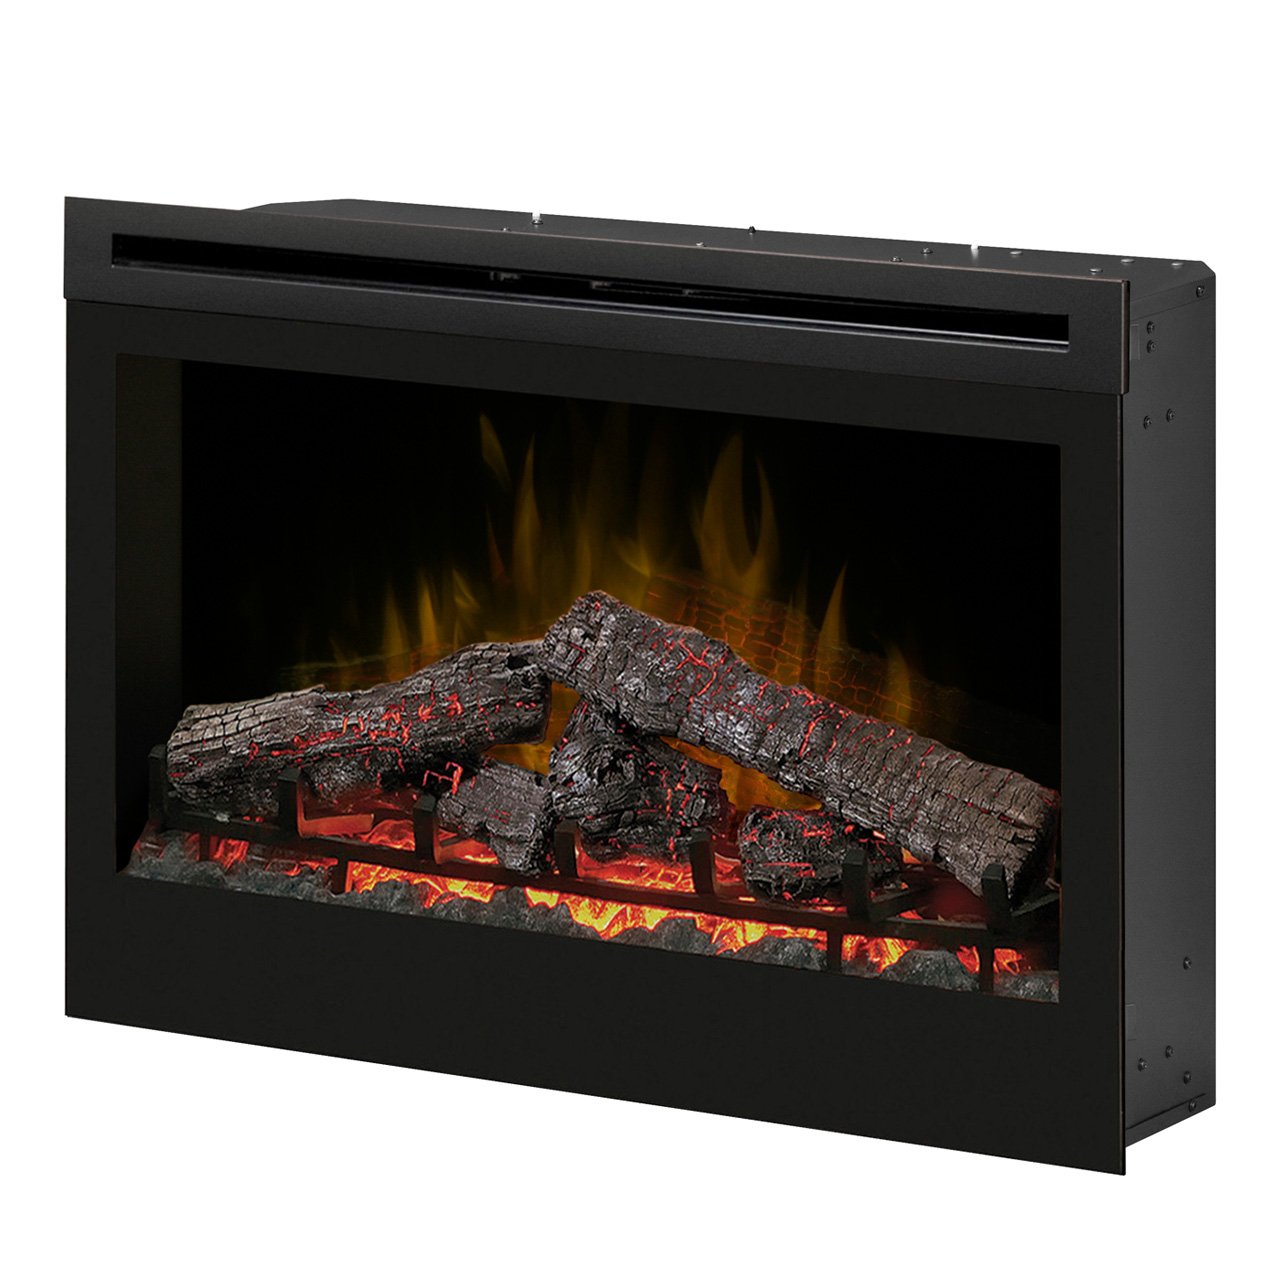 Fireplace Safety Lovely Dimplex Df3033st 33 Inch Self Trimming Electric Fireplace Insert